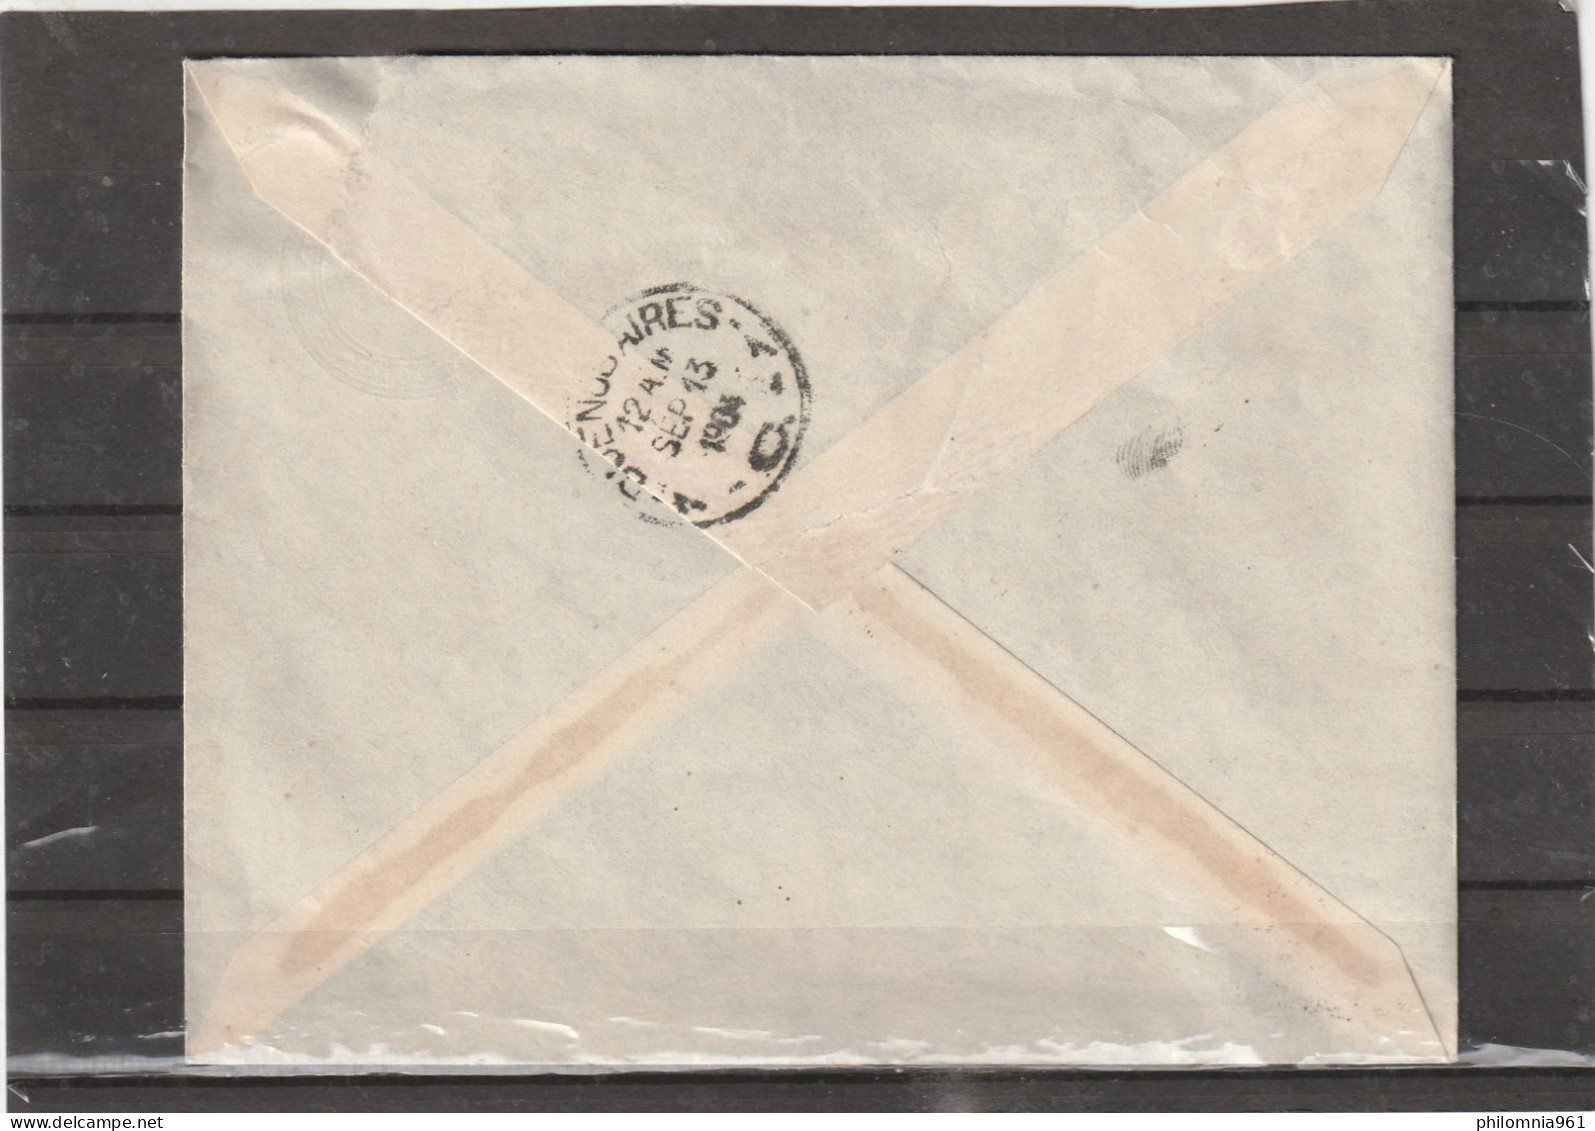 Argentina MERCEDES IBAJ PS COVER To BA 1904 - Lettres & Documents